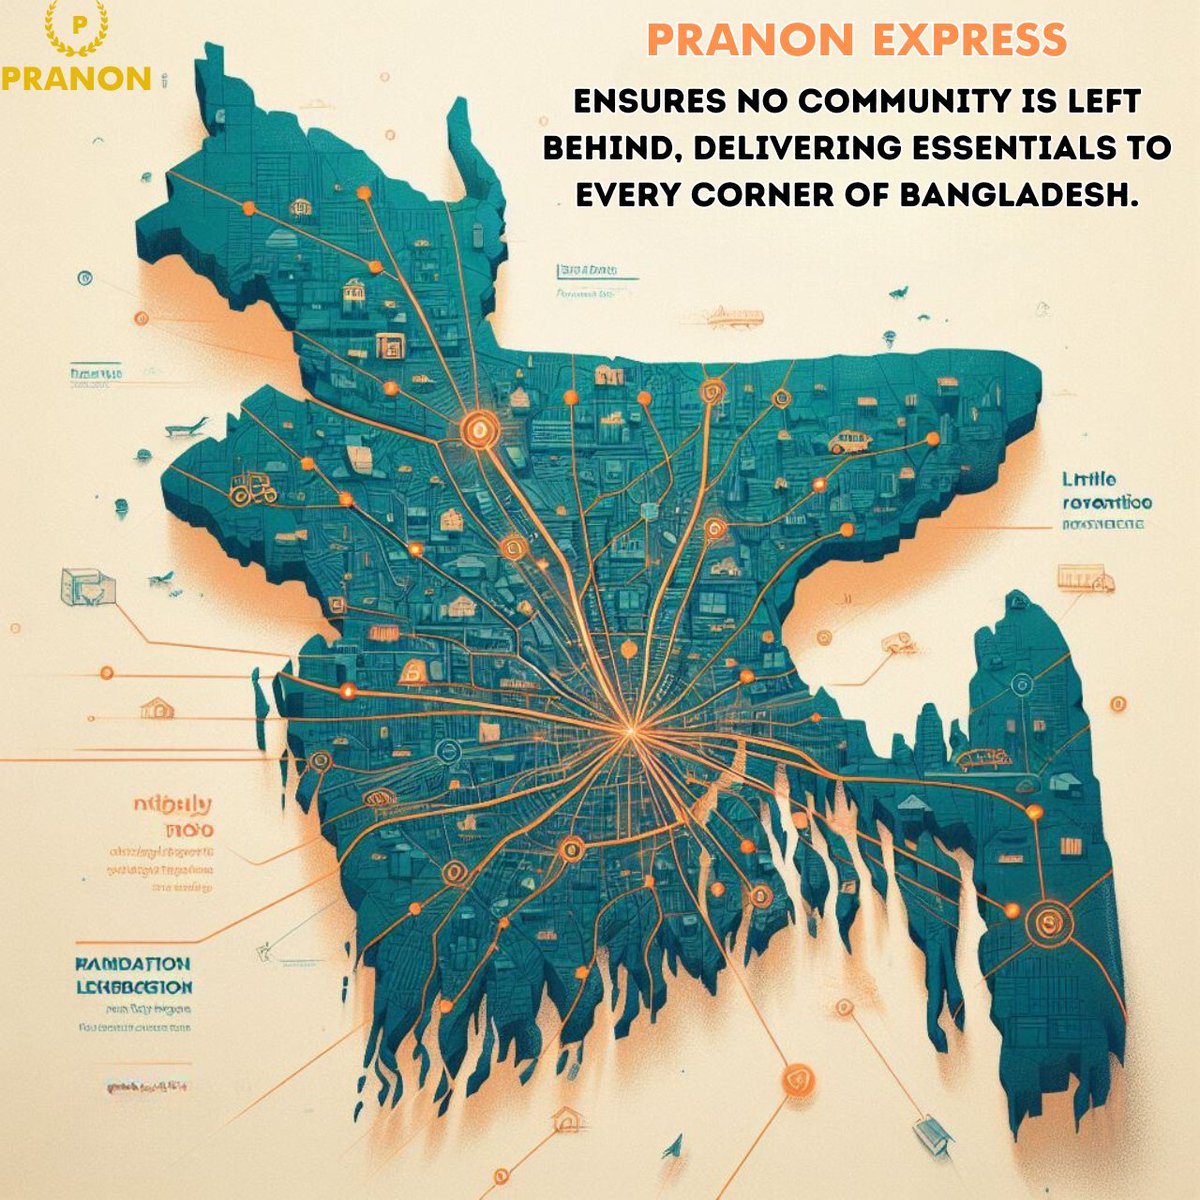 'Bridging the urban-rural divide, PRANON EXPRESS ensures that no community is left behind, delivering essential goods to even the most remote areas.' #PRANON #LastMileDelivery #CommunityConnectivity #PRANONEXPRESS #BANGLADESH